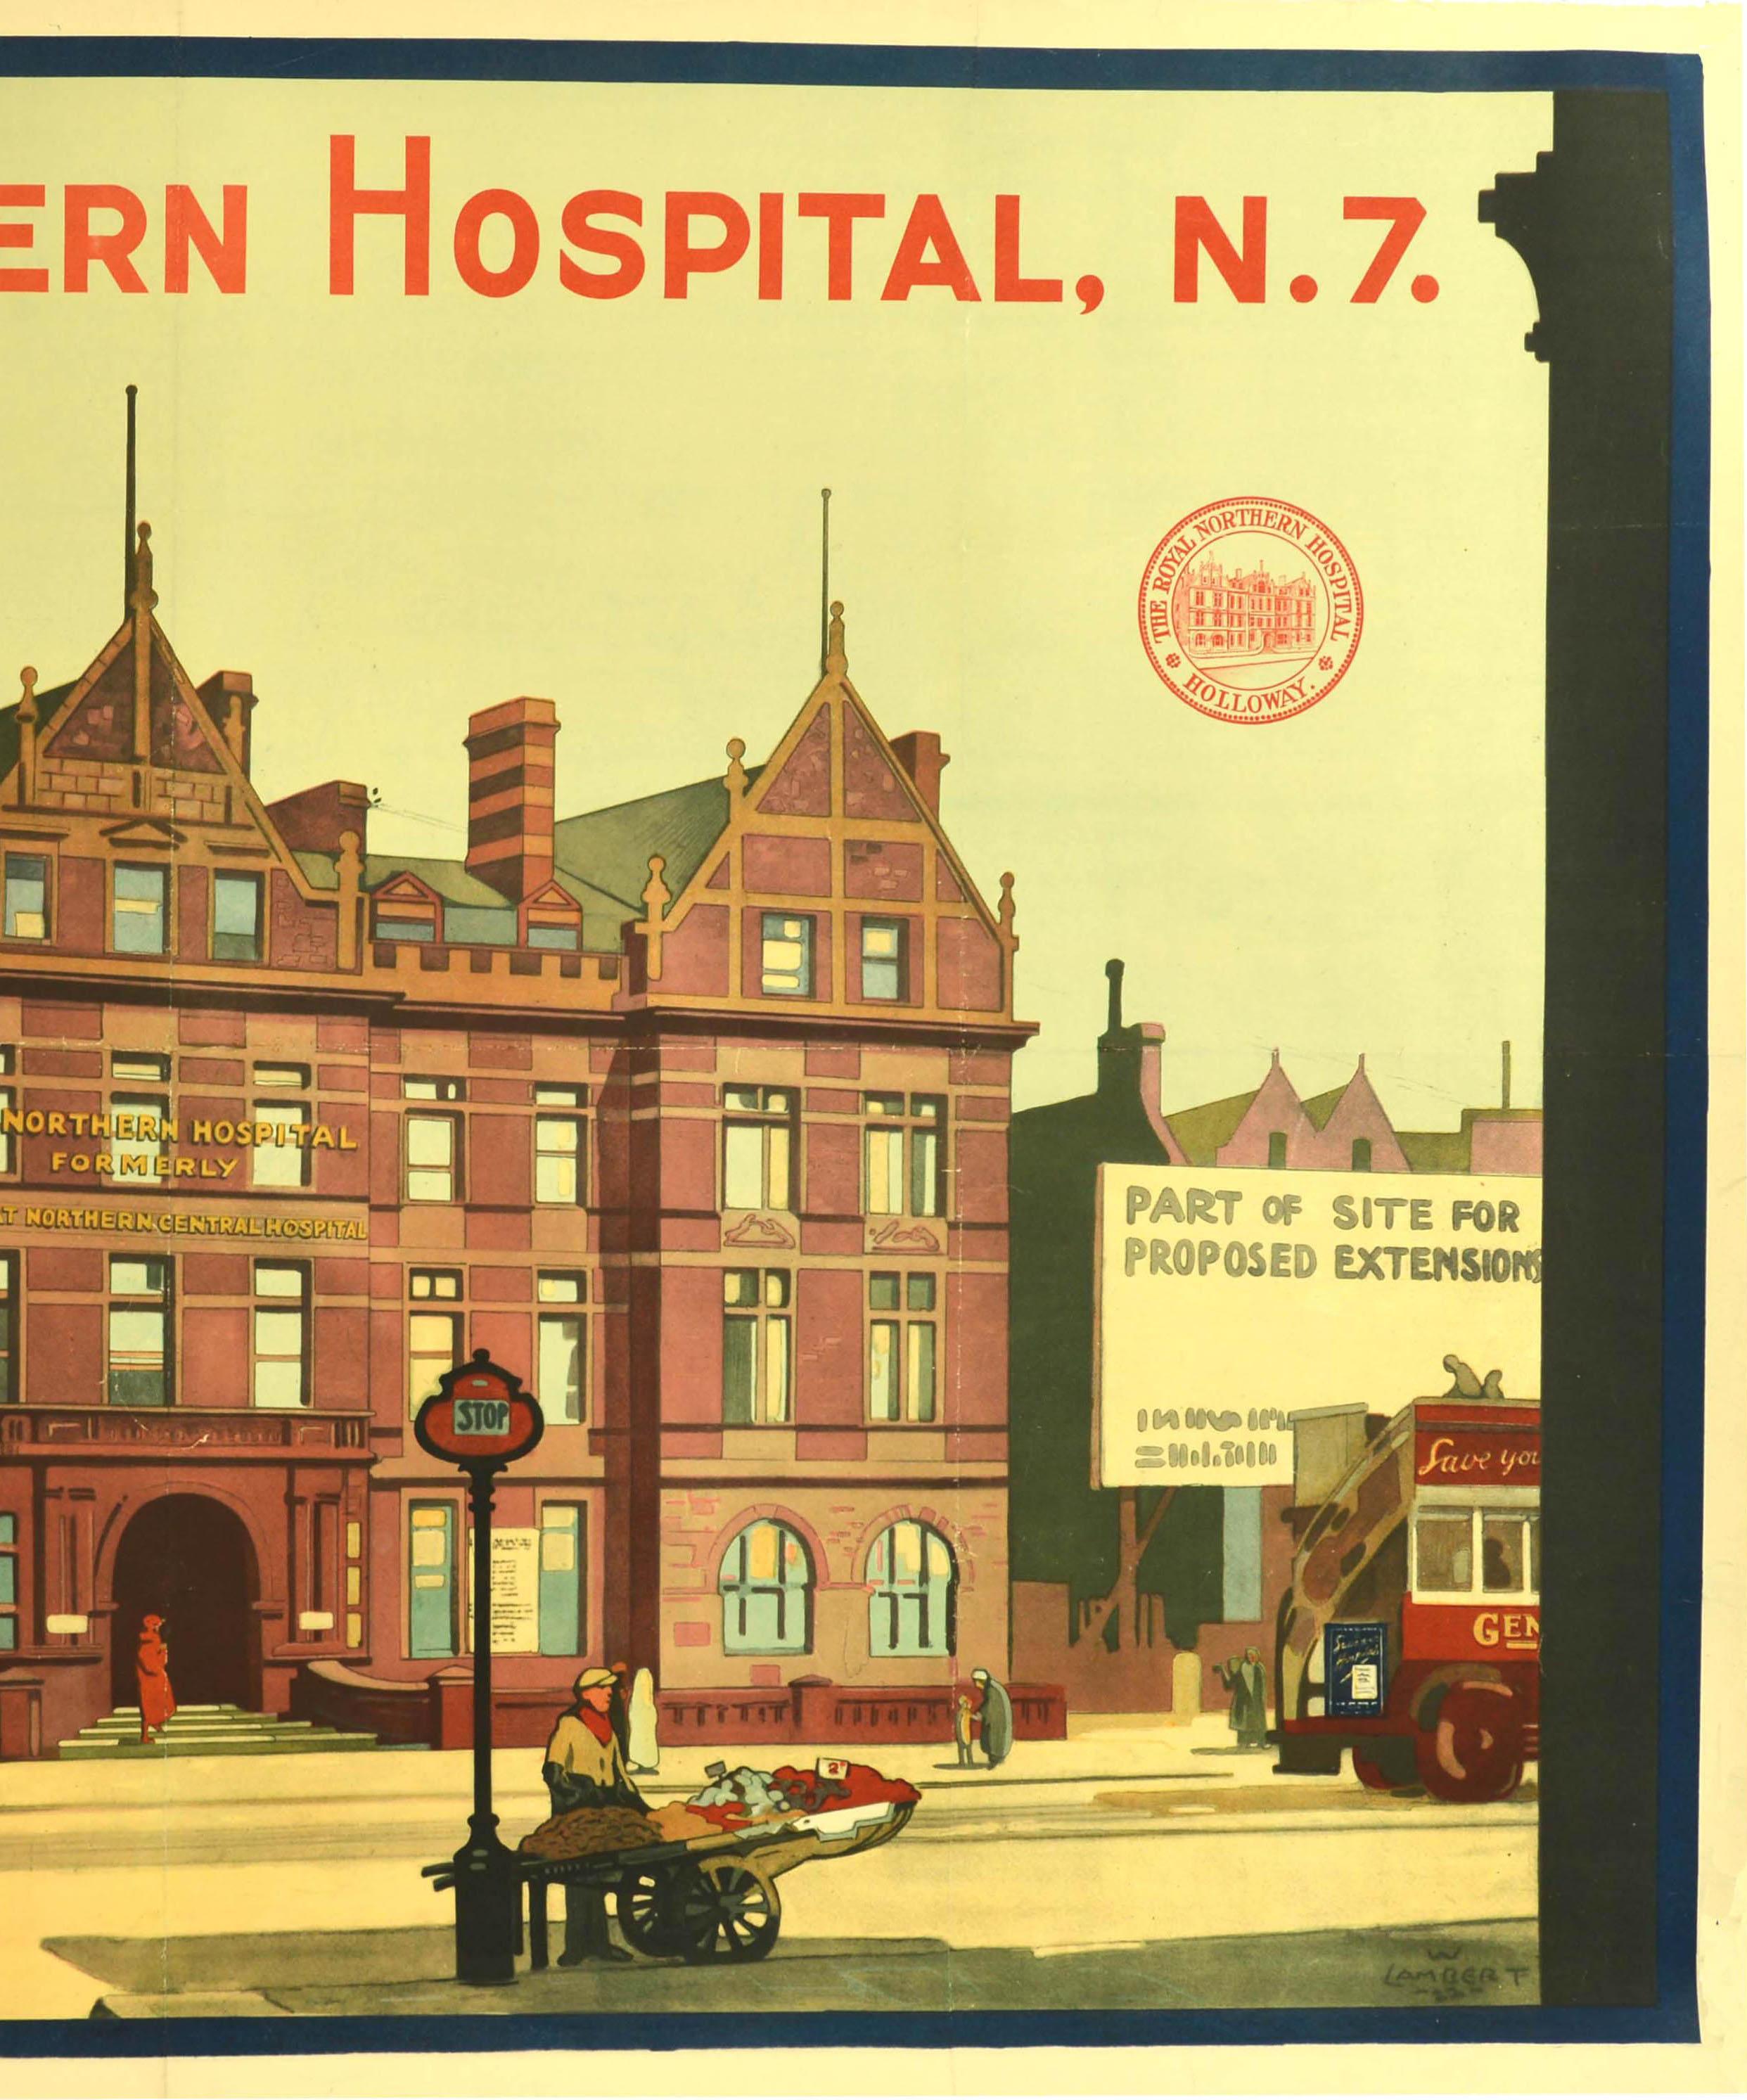 Original antique poster for the Royal Northern Hospital N7 featuring the smart new hospital with a person on the main staircase entrance, people walking by a fruit stall and flower sellers, a bus stop and a General London bus driving by a sign